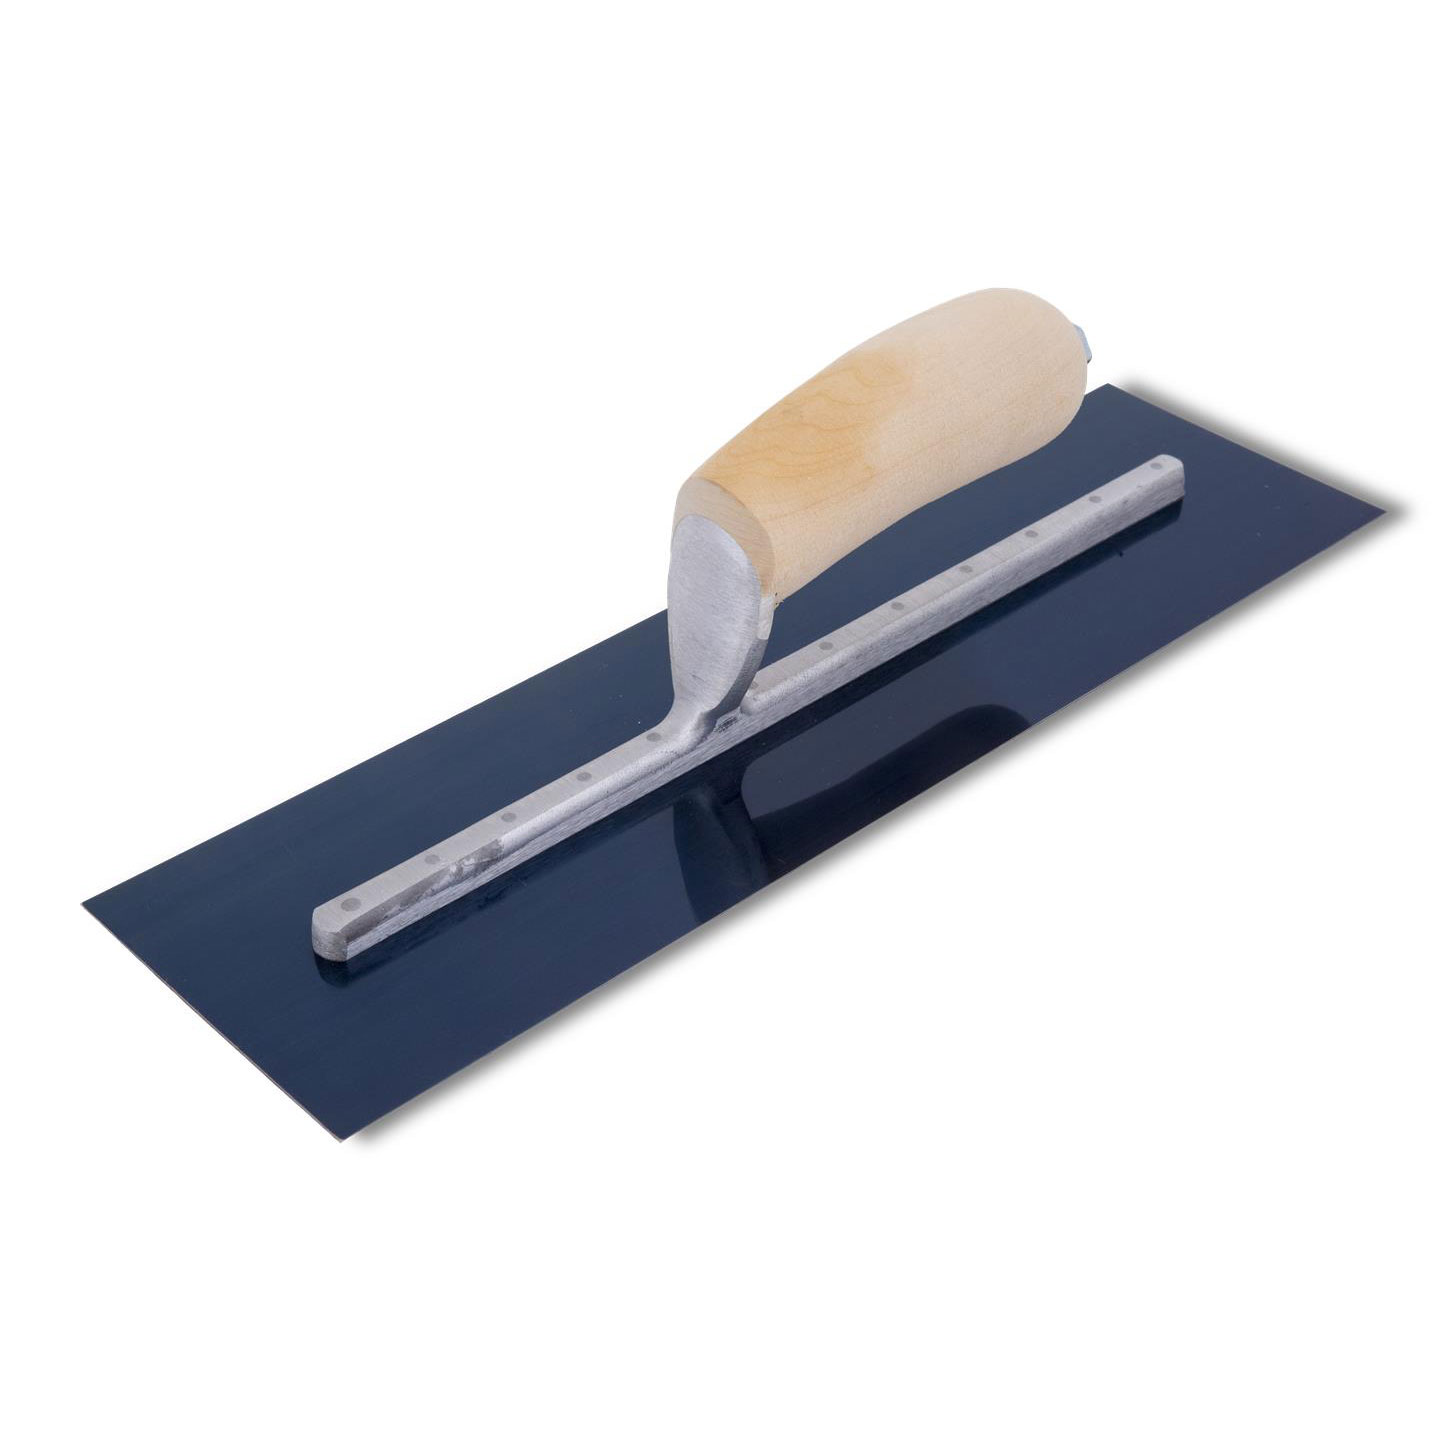 Marshalltown MXS145B 14in x 5in Blue Steel Finishing Trowel with Curved Wood Handle MXS145B